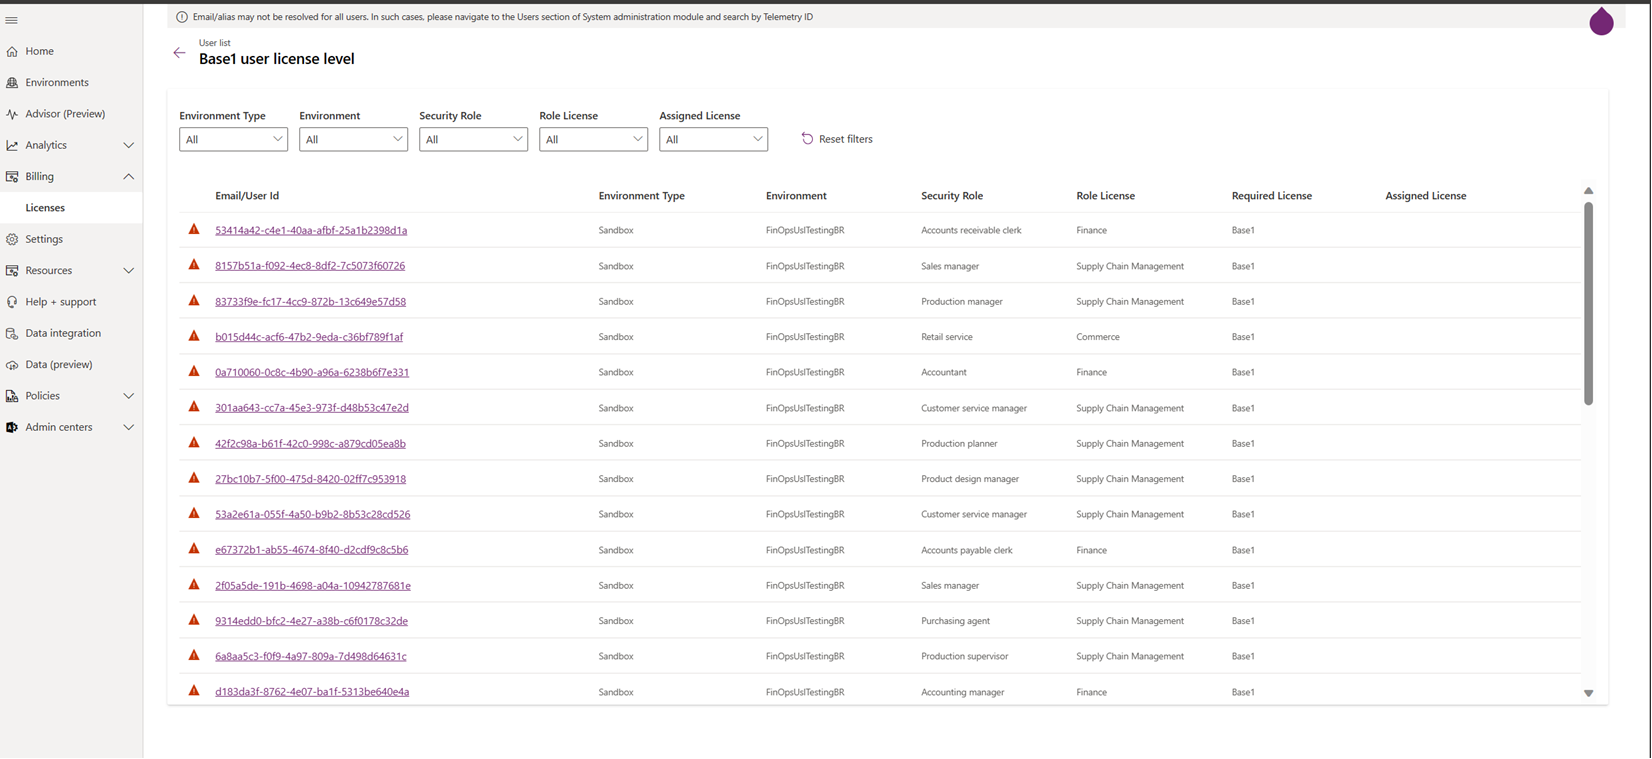 Screenshot of the details of all roles assigned to a selected user across all finance and operations environments in a tenant.